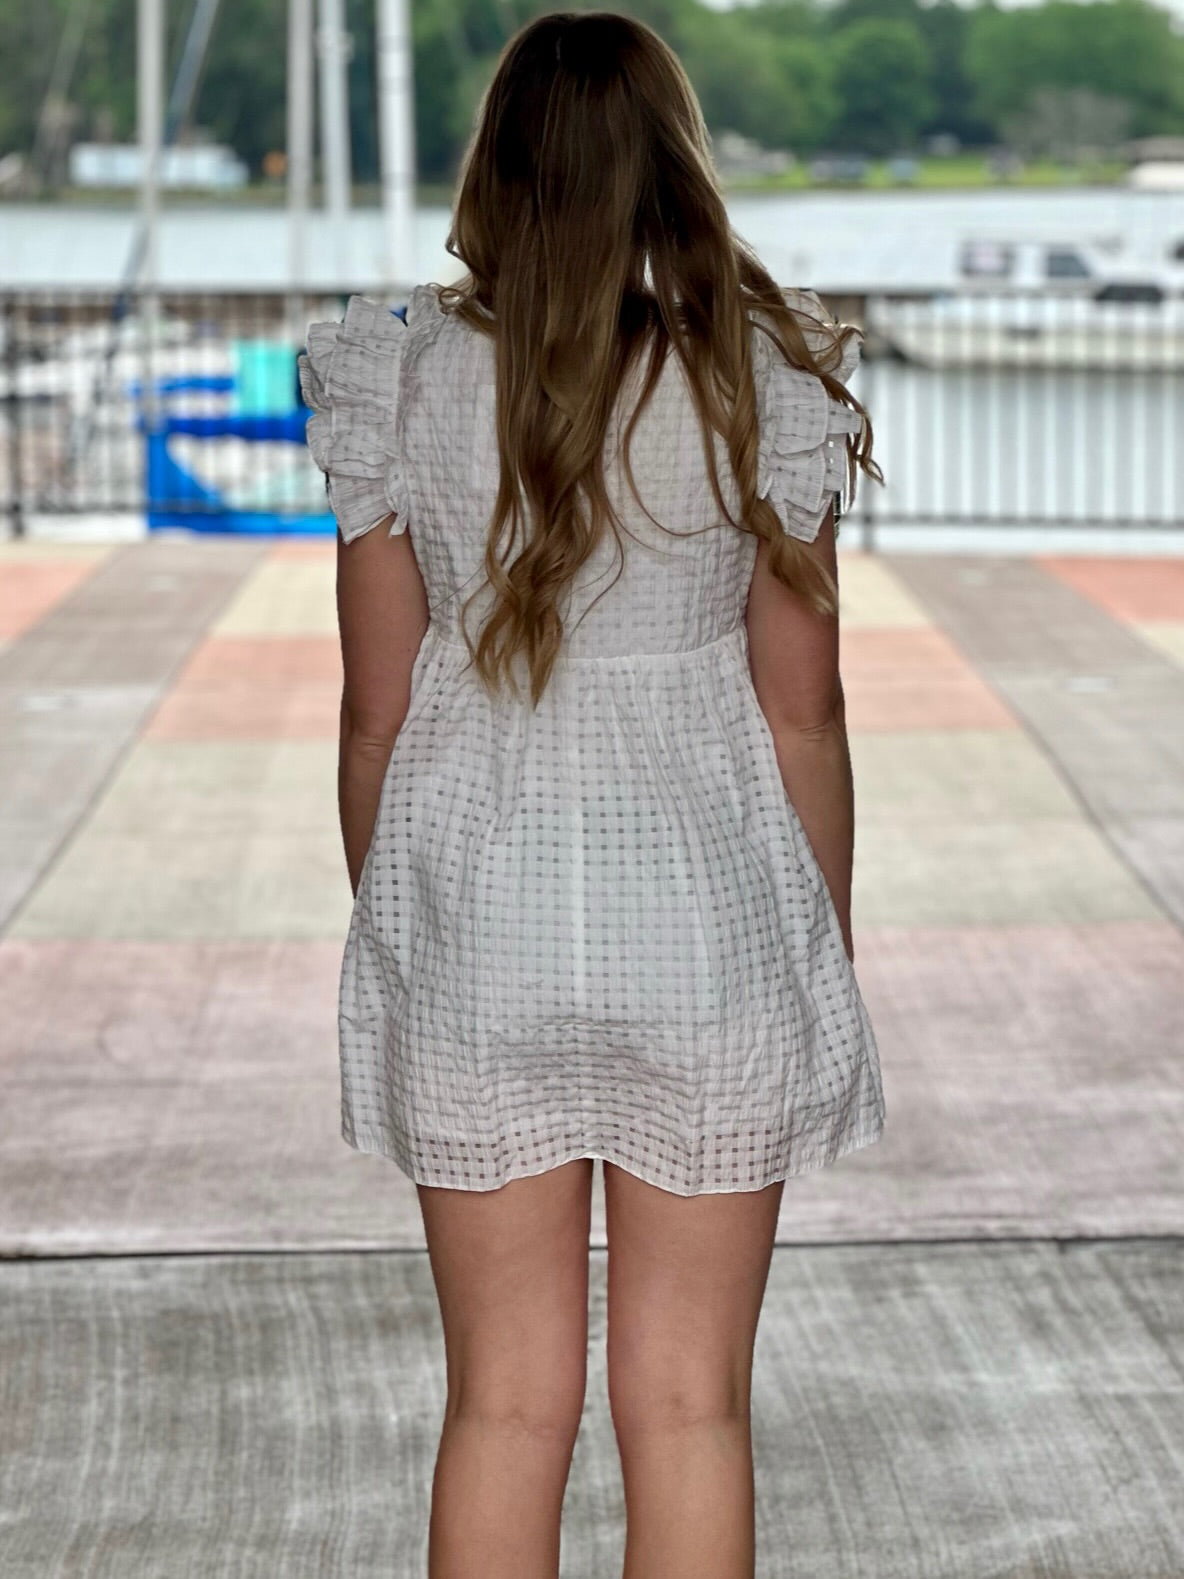 Lexie in white dress back view